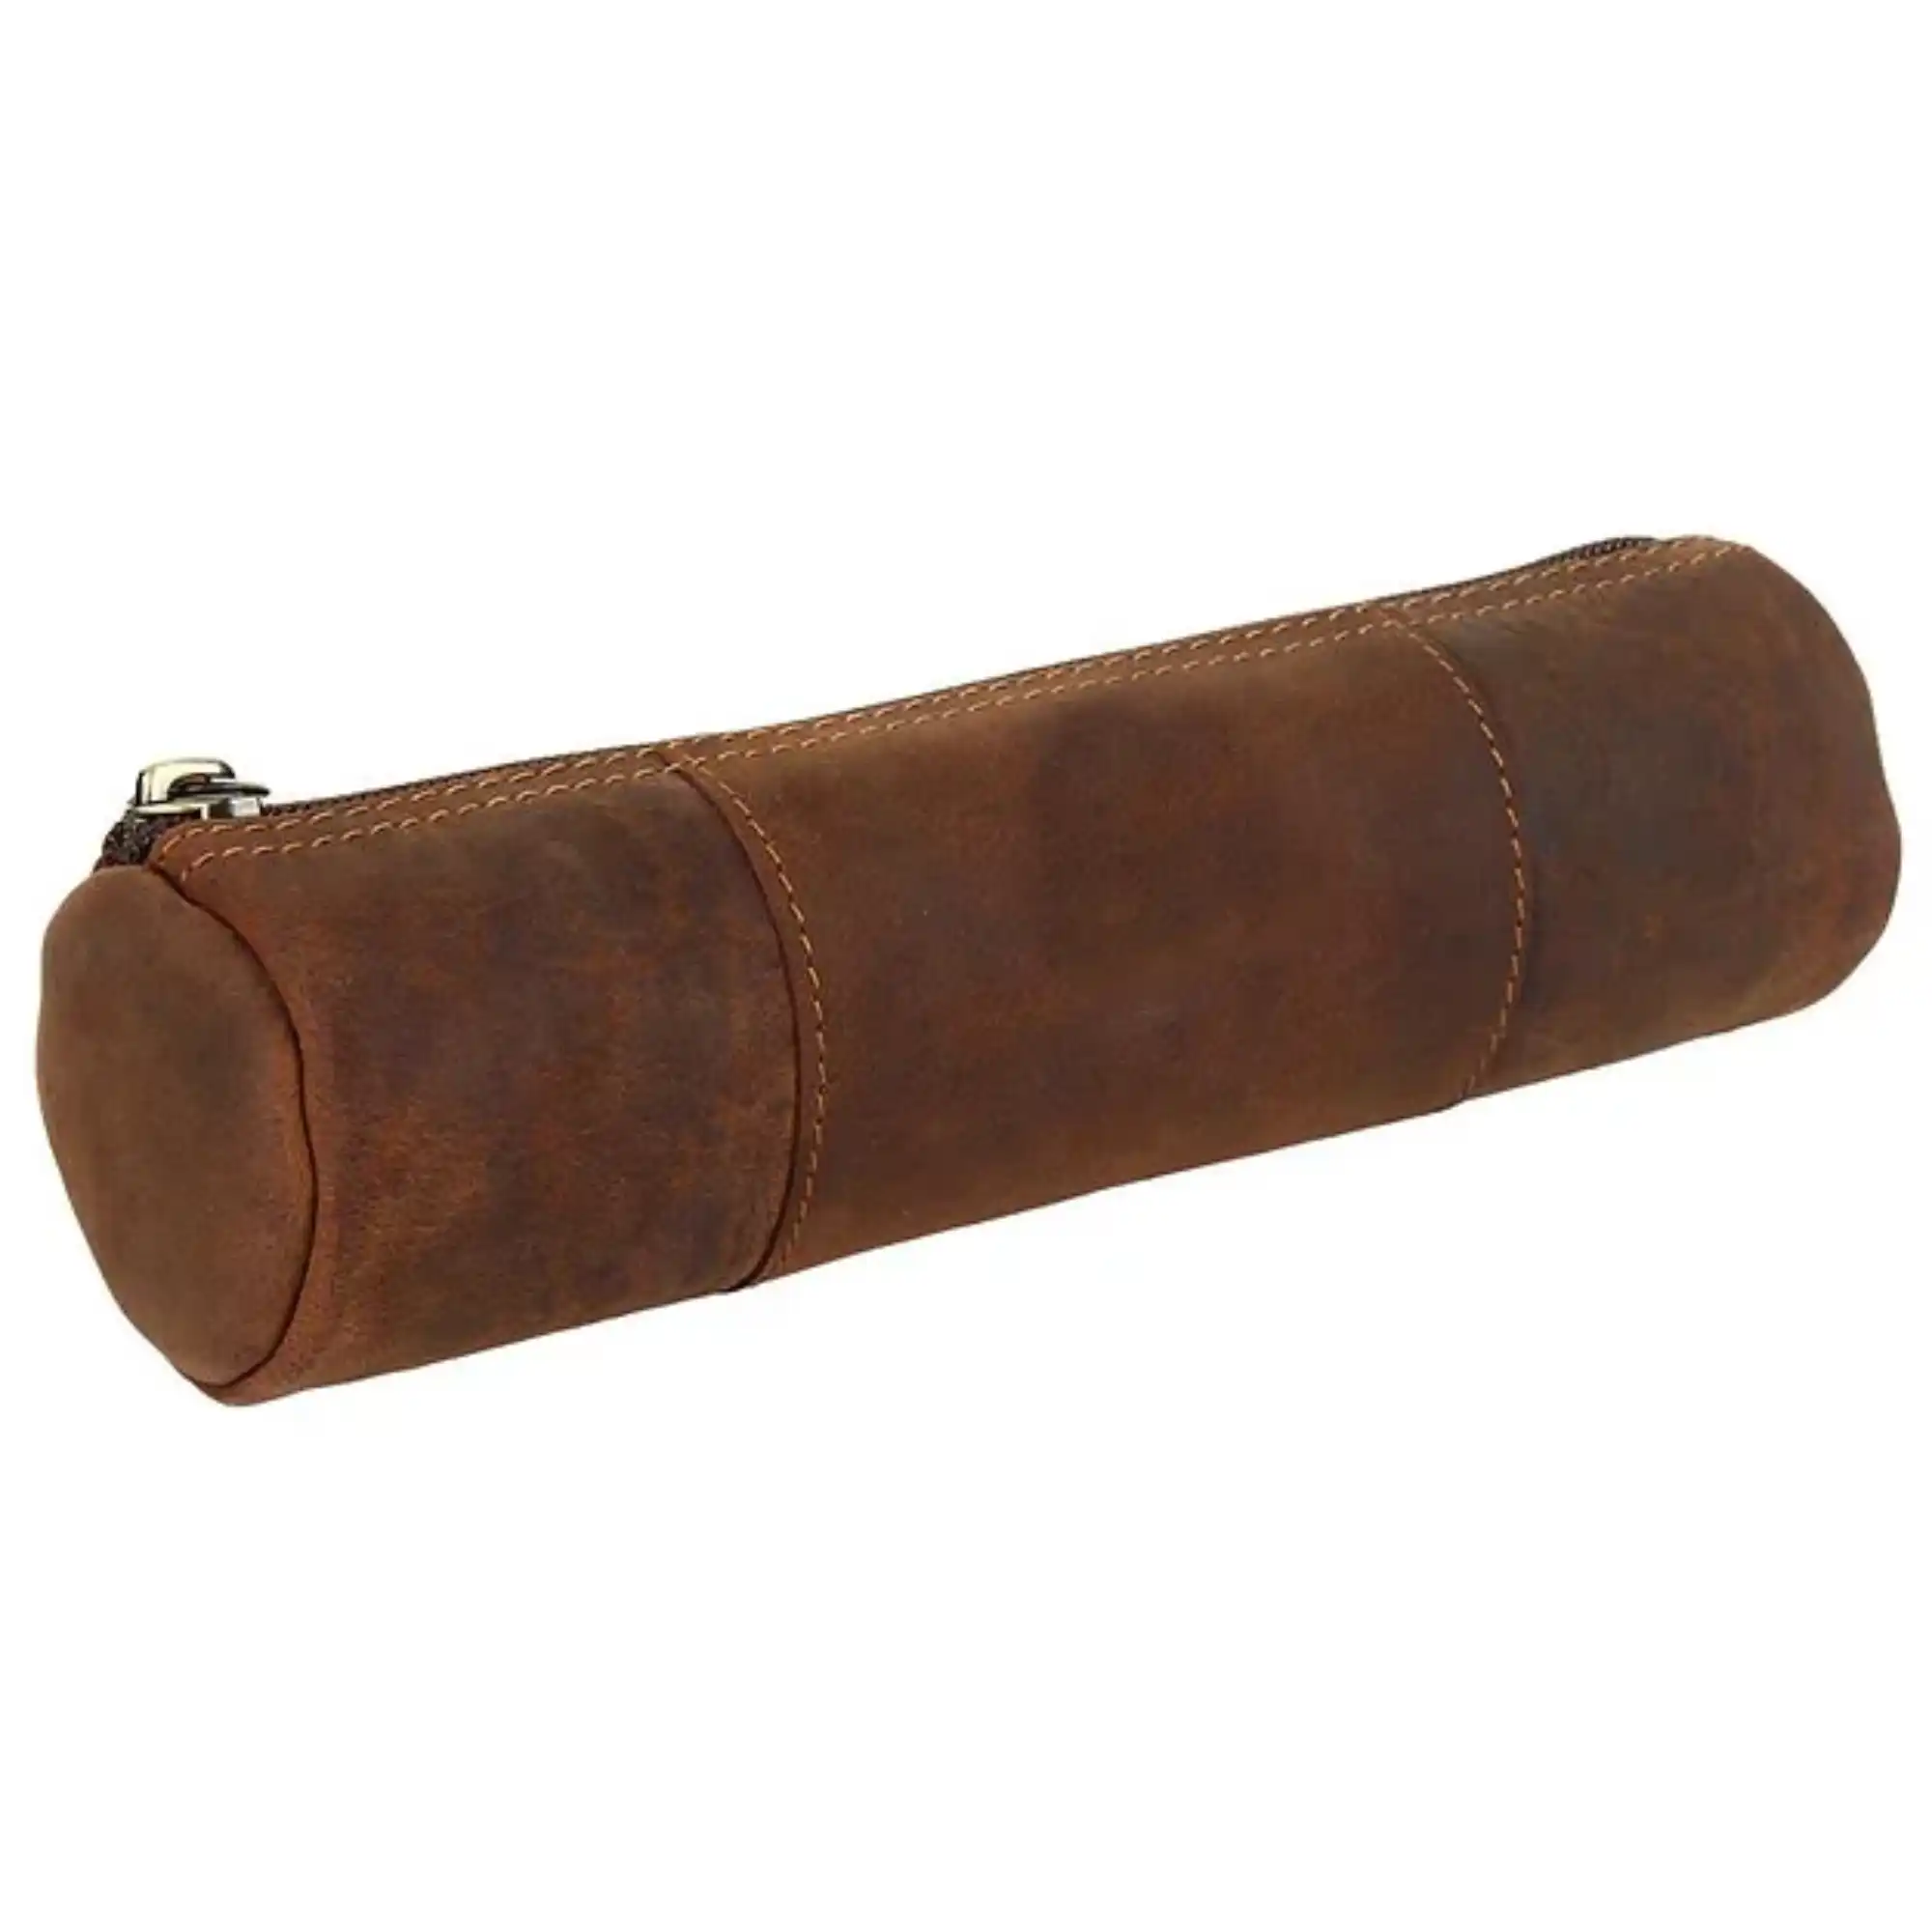 Vintage Style Leather Pouch